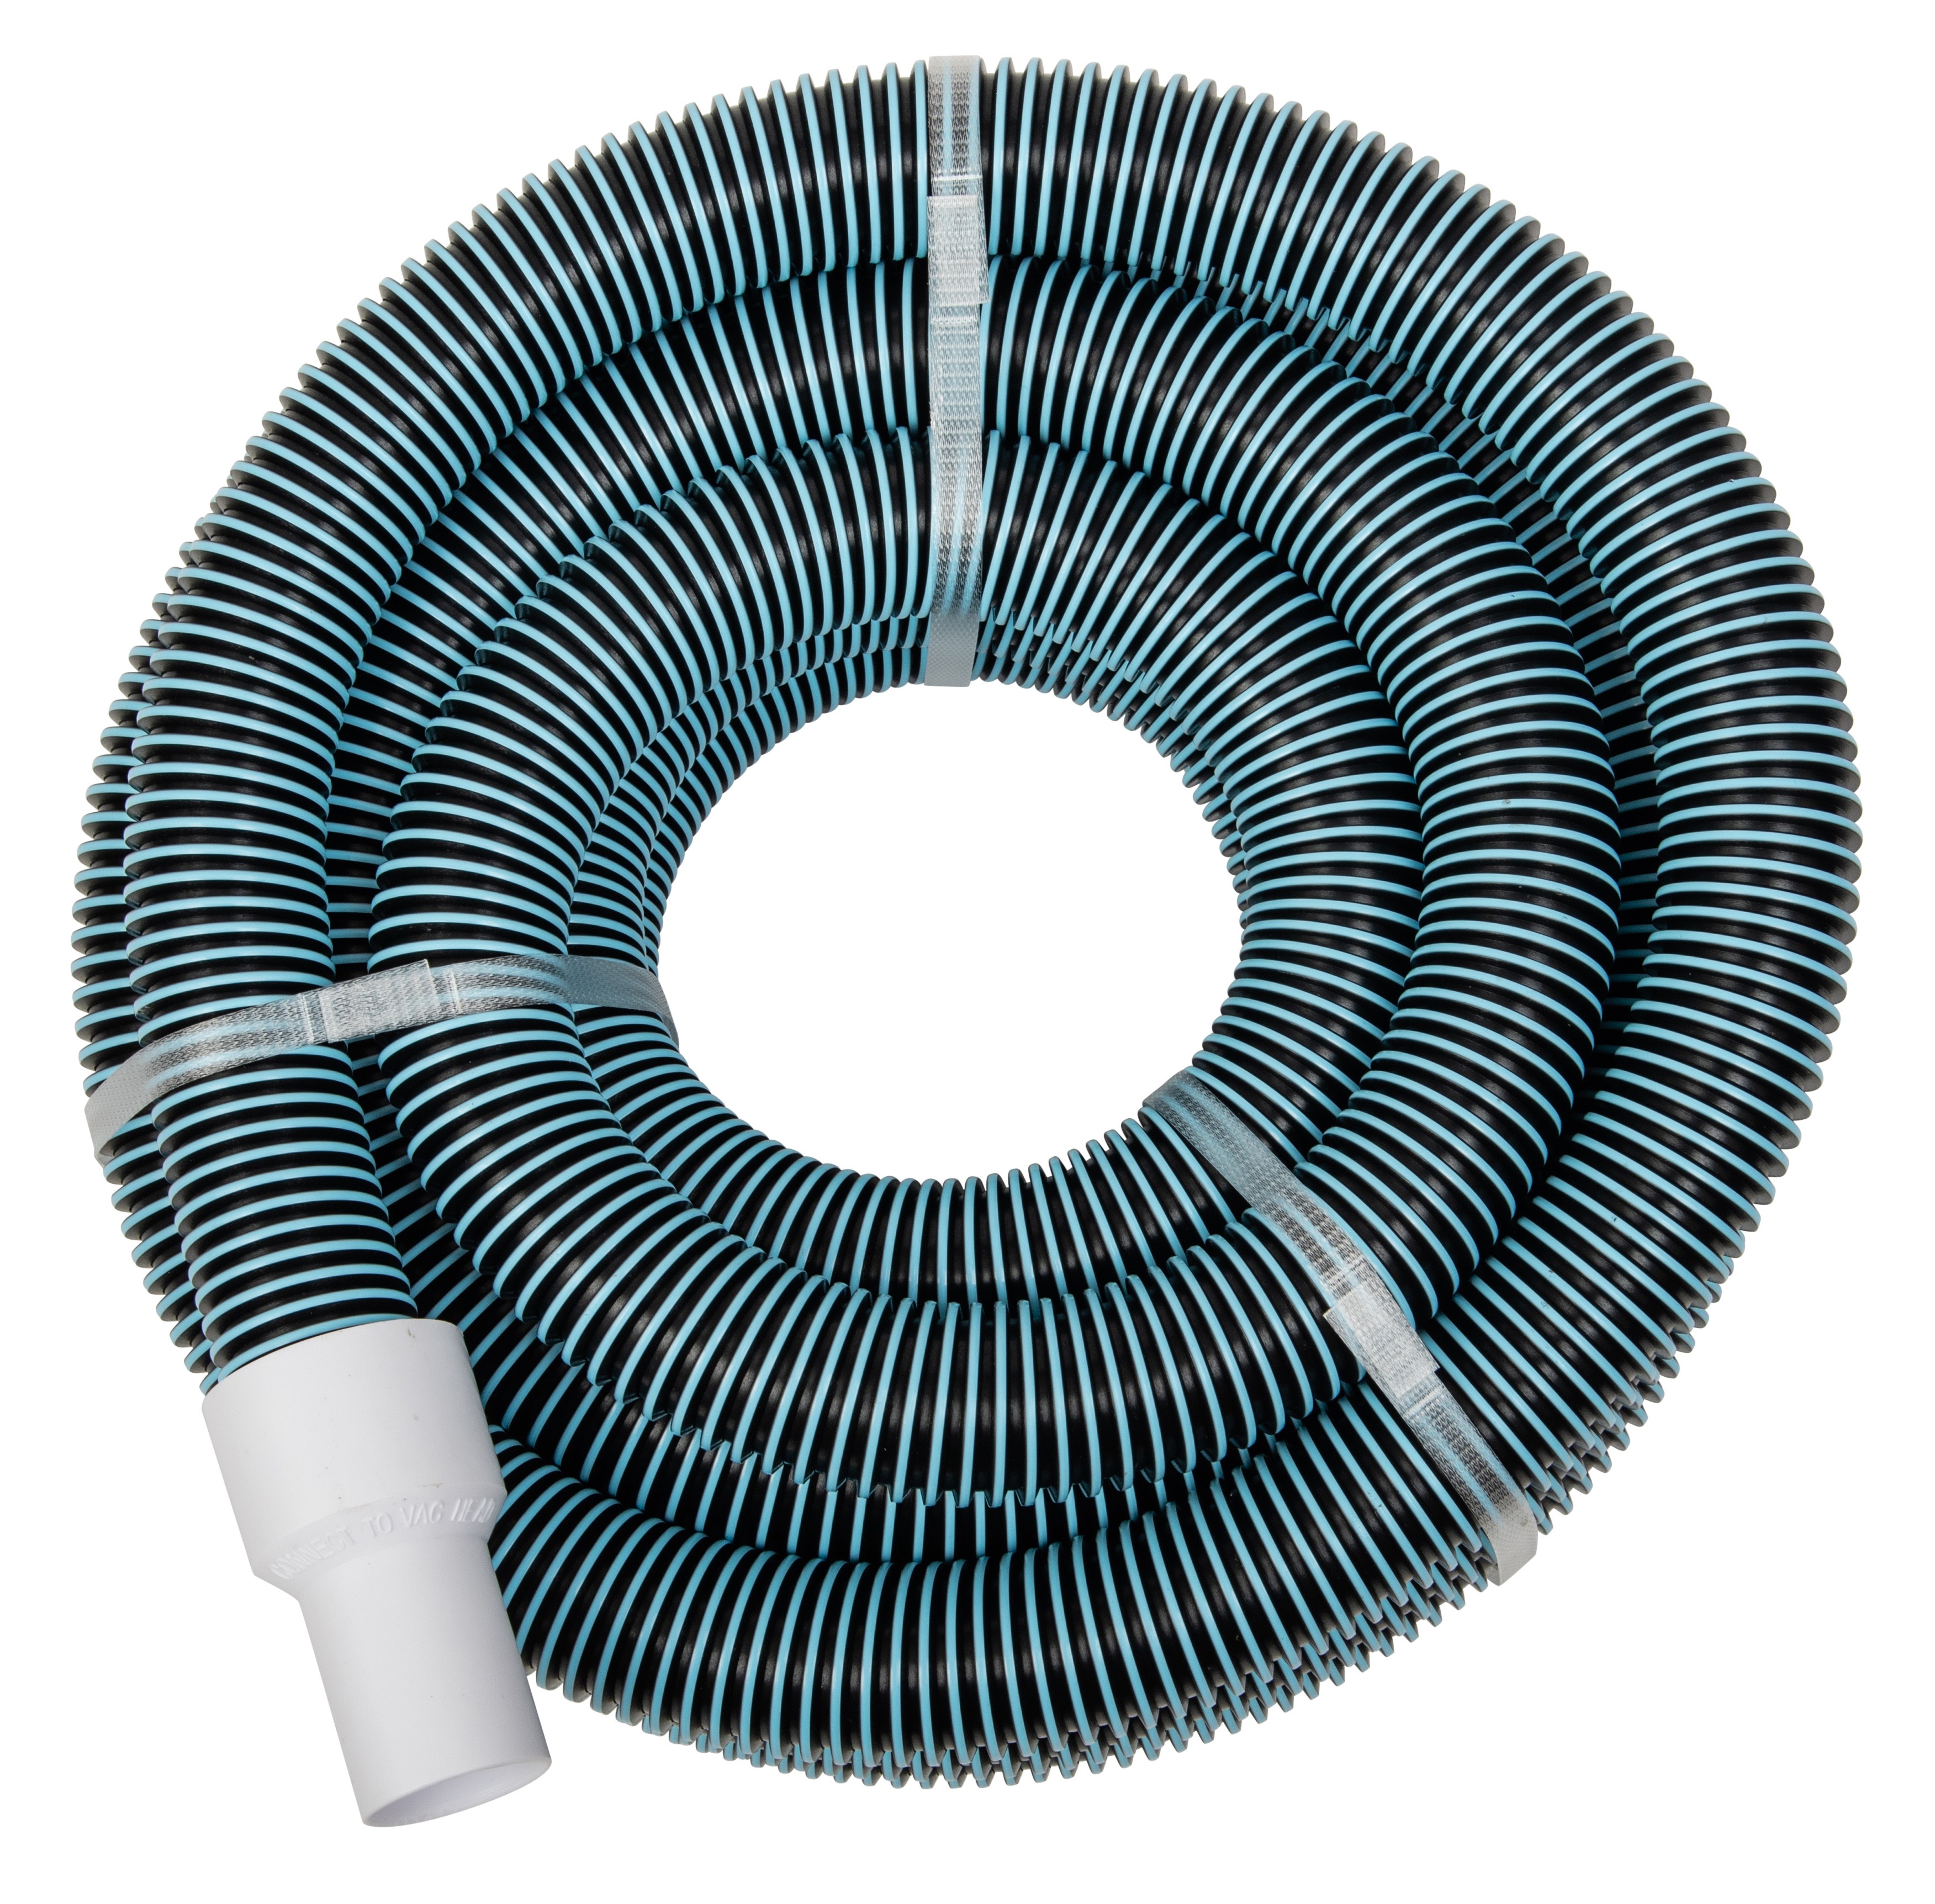 Swimming Pool Commercial Grade Vacuum Hose 1.25" - 25ft length with Swivel End